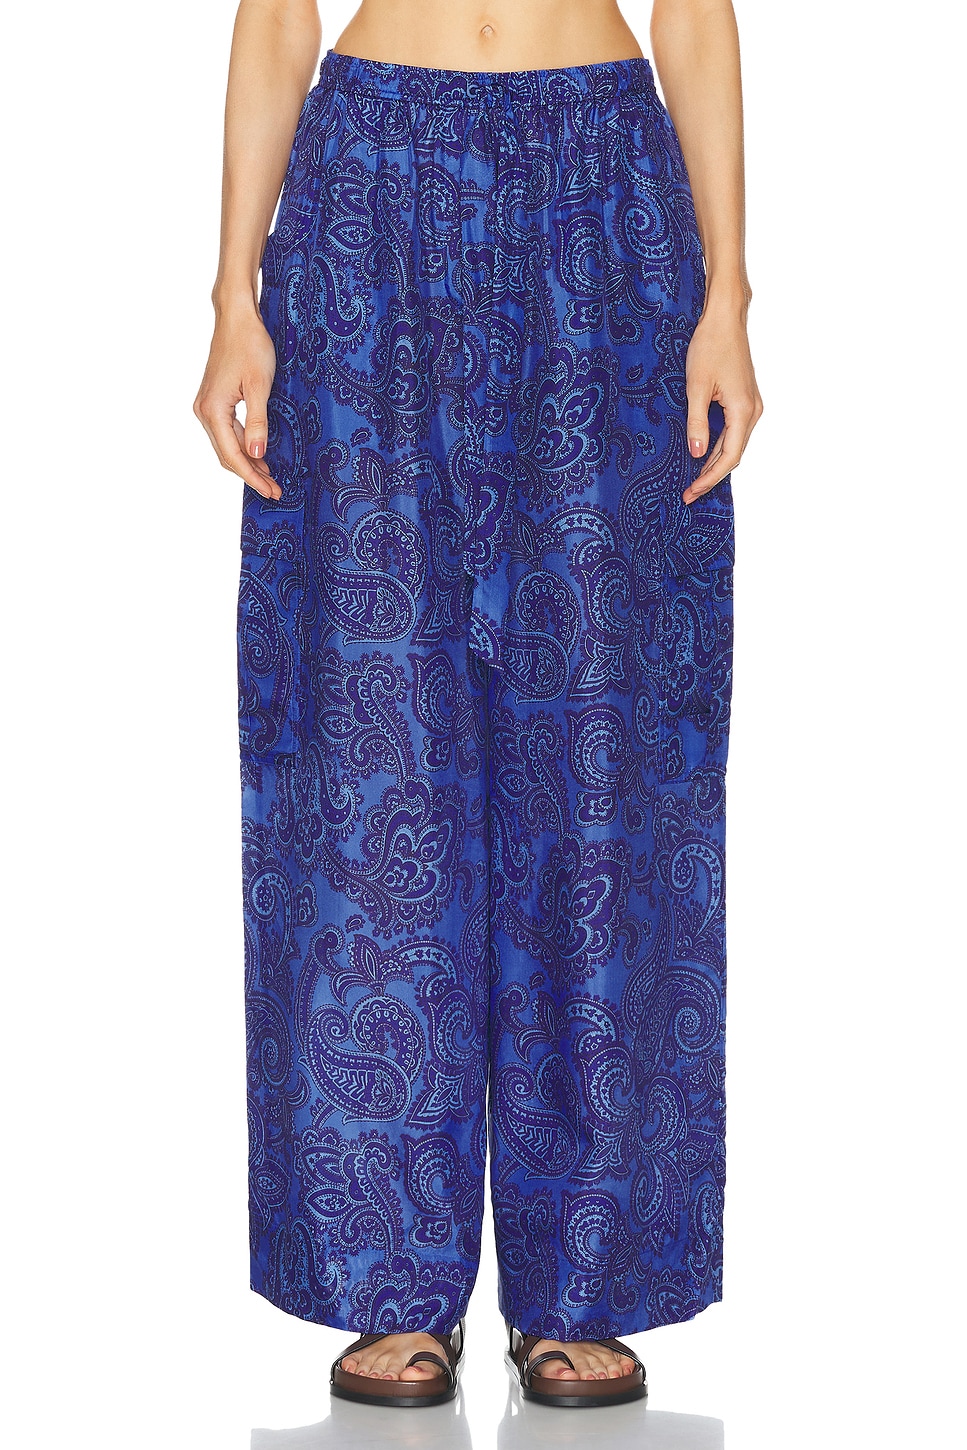 Image 1 of Zimmermann Ottie Relaxed Pant in Blue Paisley